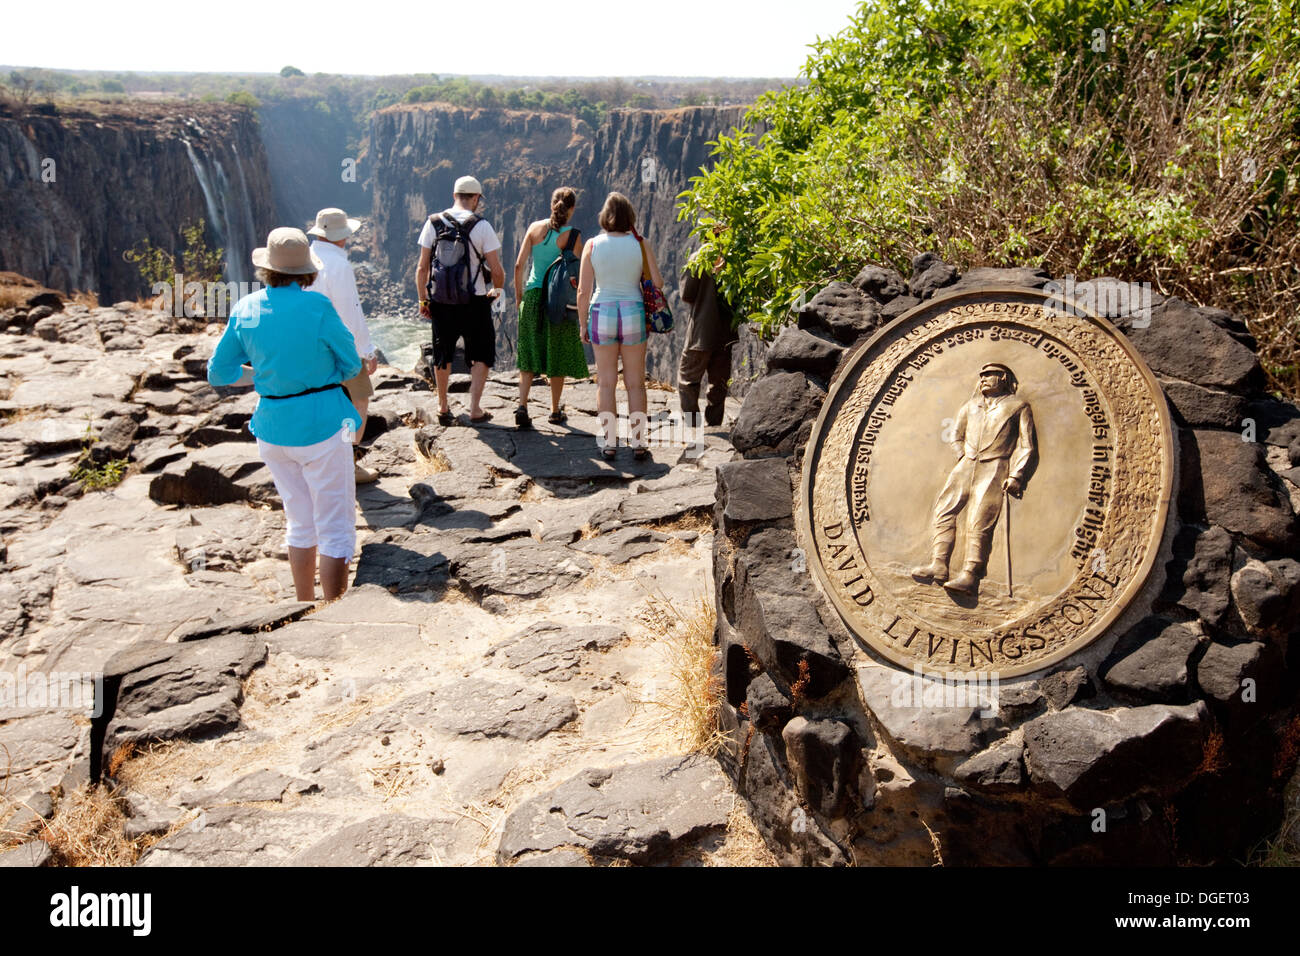 Tourists at the Memorial plaque to David Livingstone at the top of the Victoria Falls, Livingstone Island, Zambia side, Africa Stock Photo